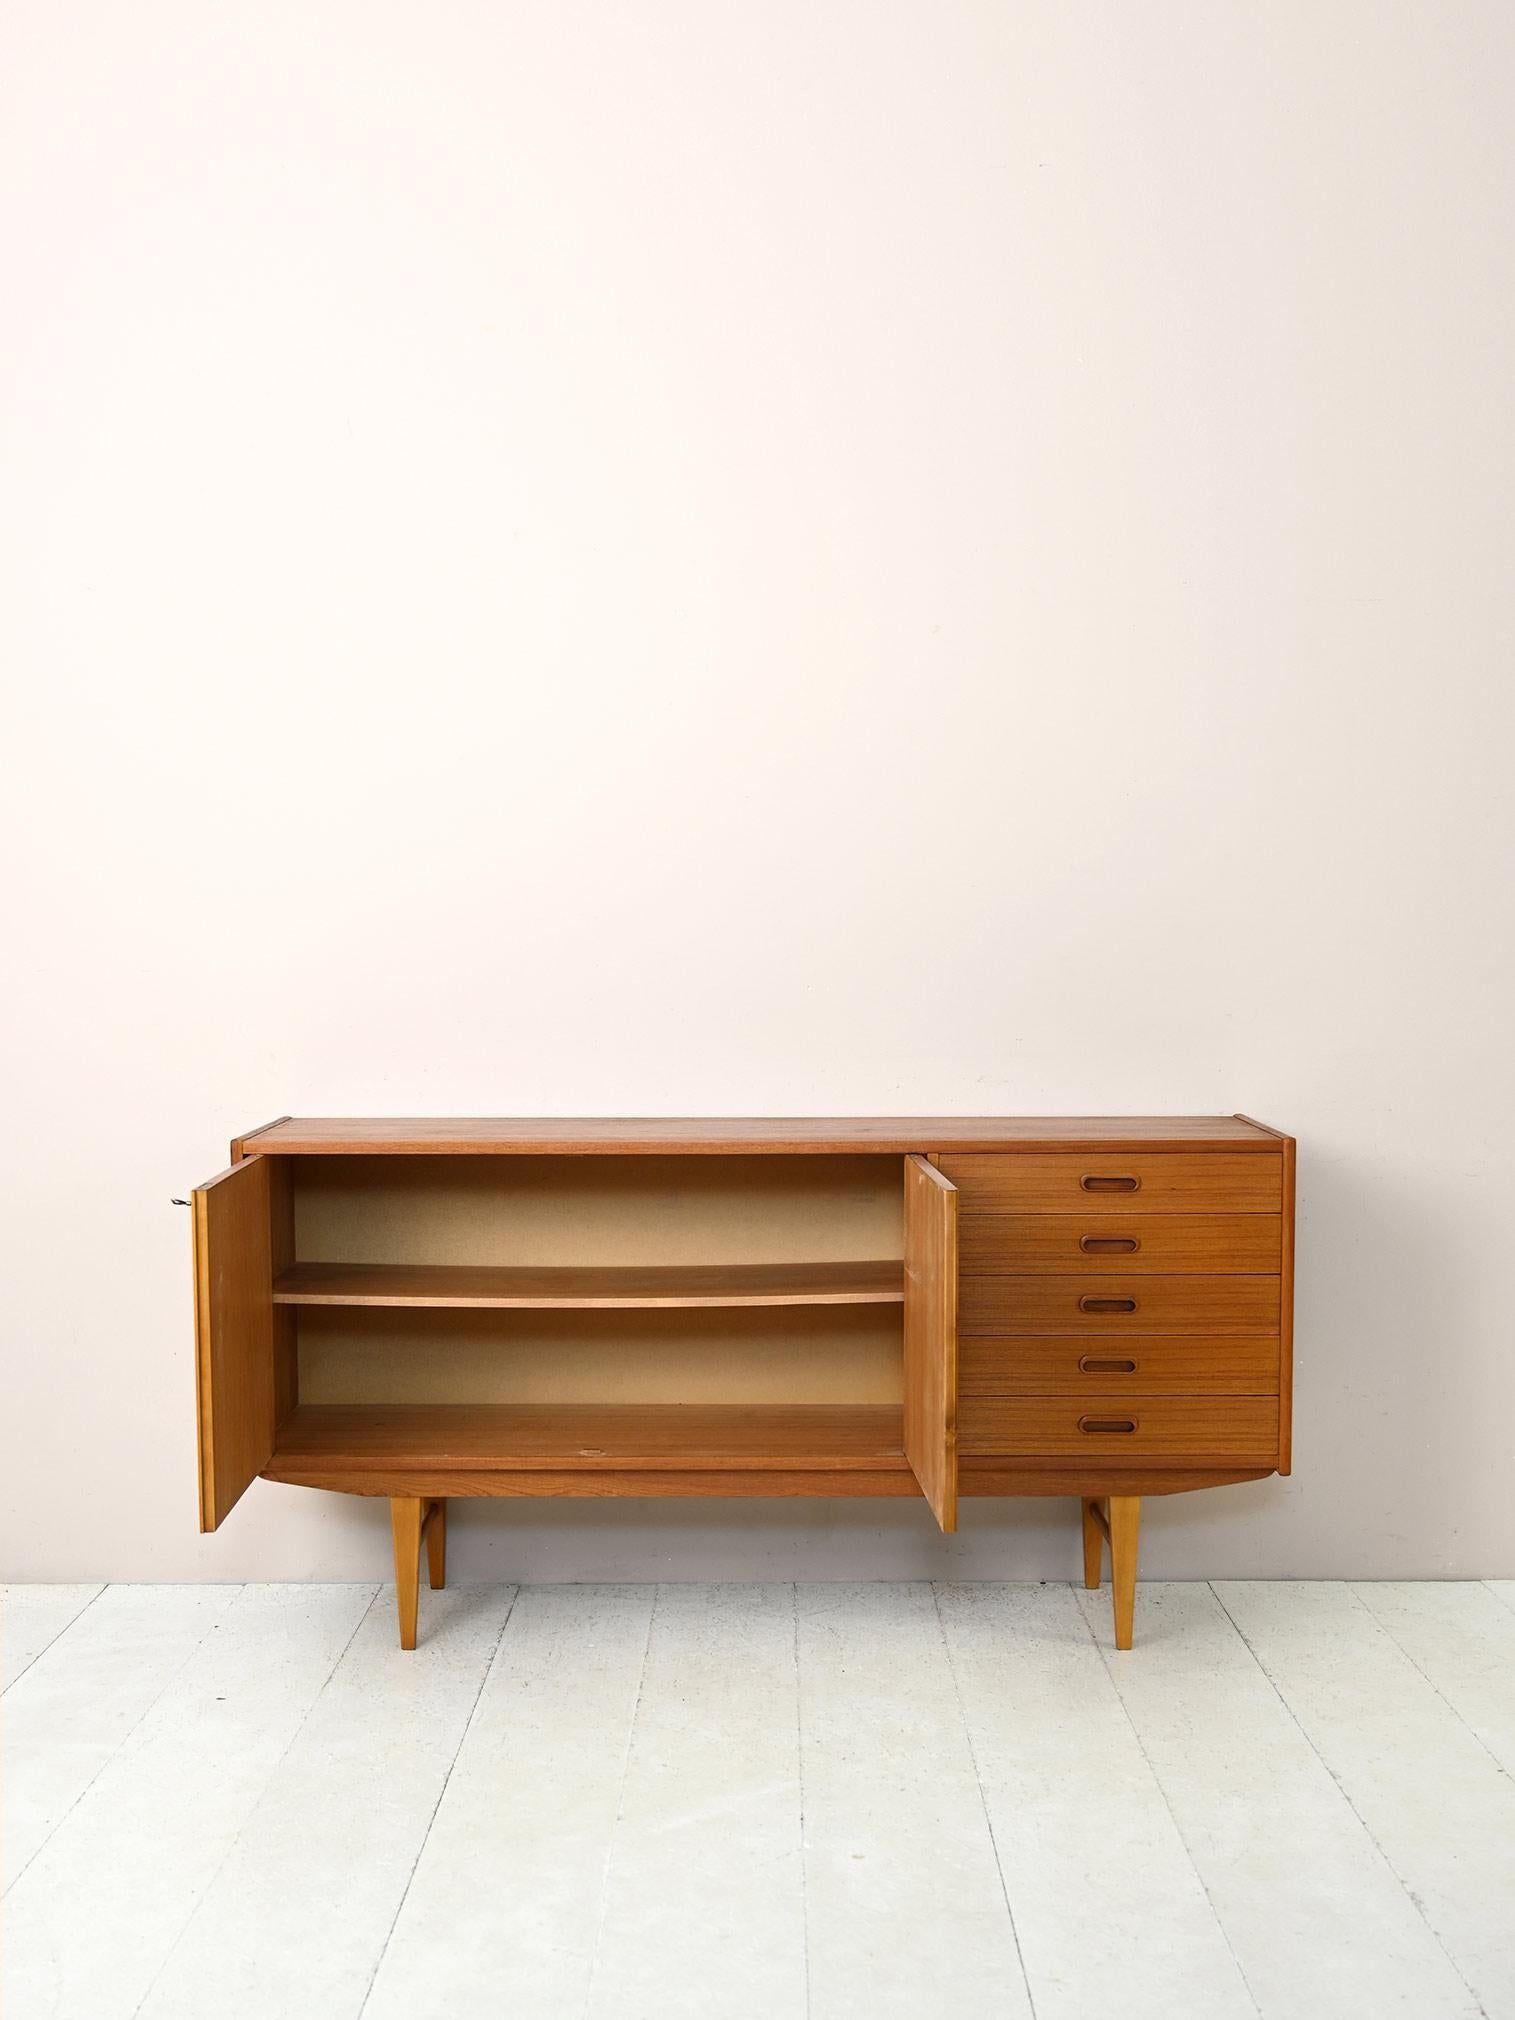 Original vintage Scandinavian sideboard from the 1960s.

A modern piece of furniture with retro charm that, thanks to its minimalist style, fits well in contemporary environments. The teak frame features 5 drawers on one side and a storage